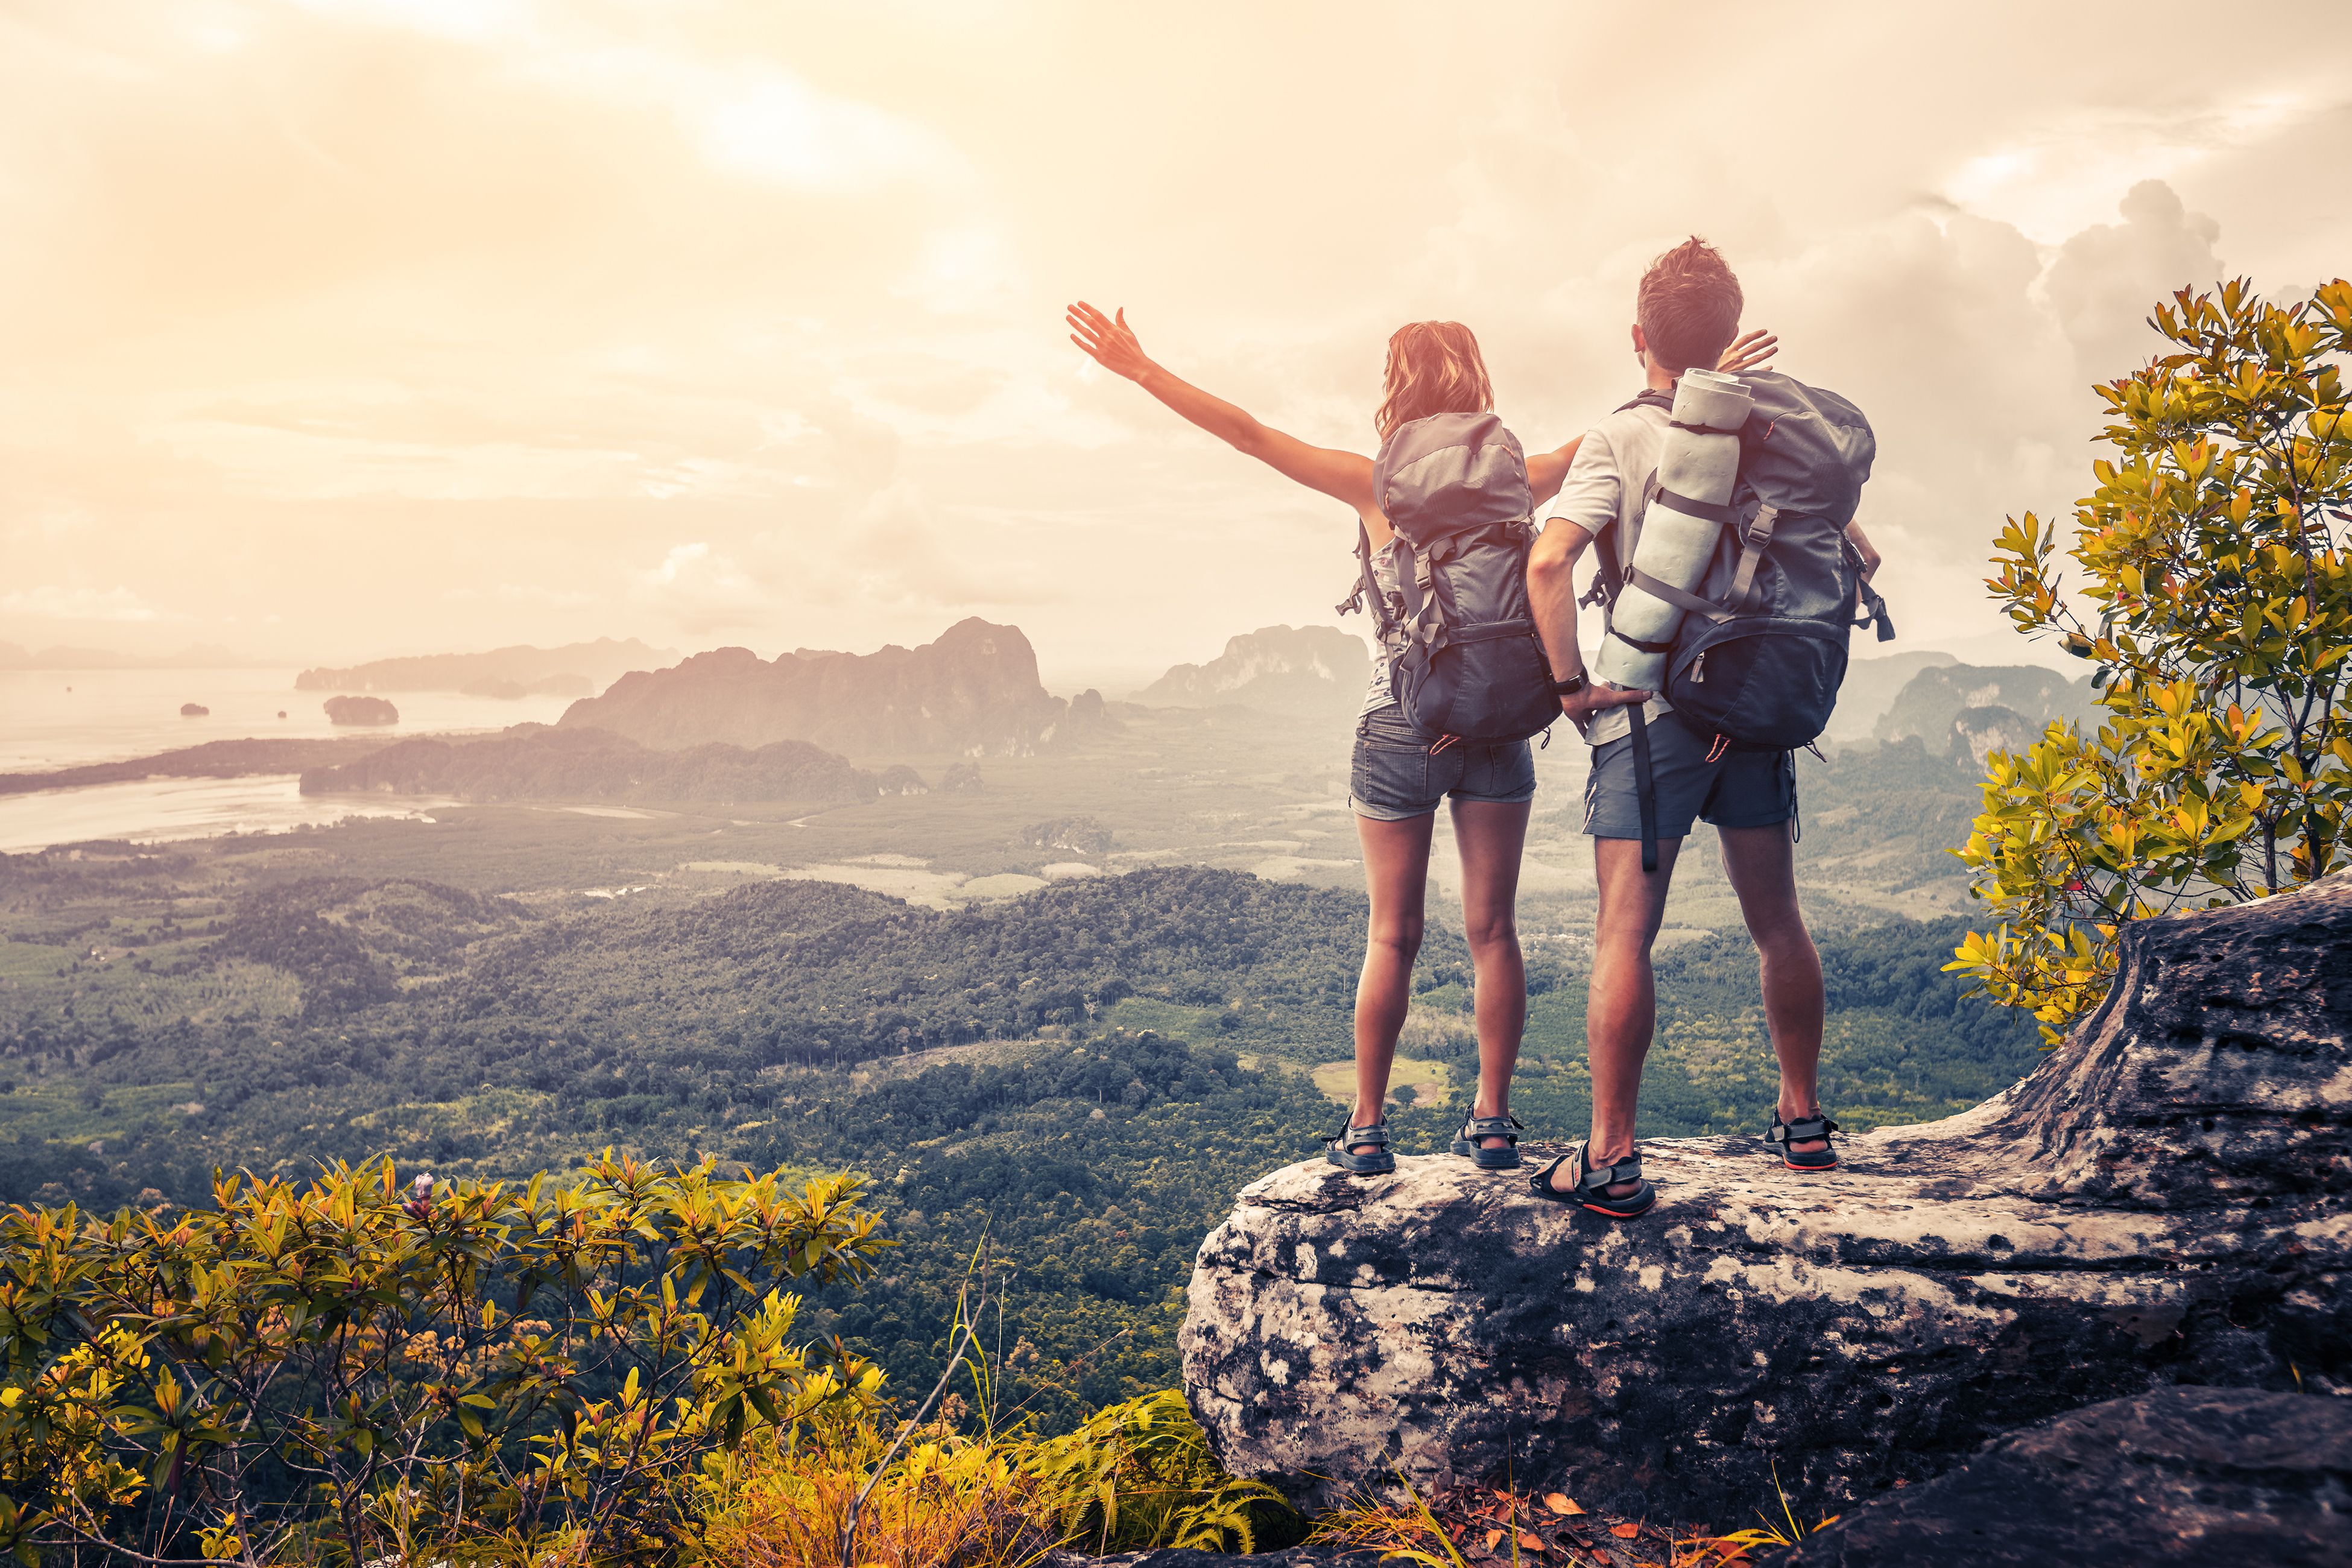 A man and a woman on a hiking trip. | Source: Shutterstock